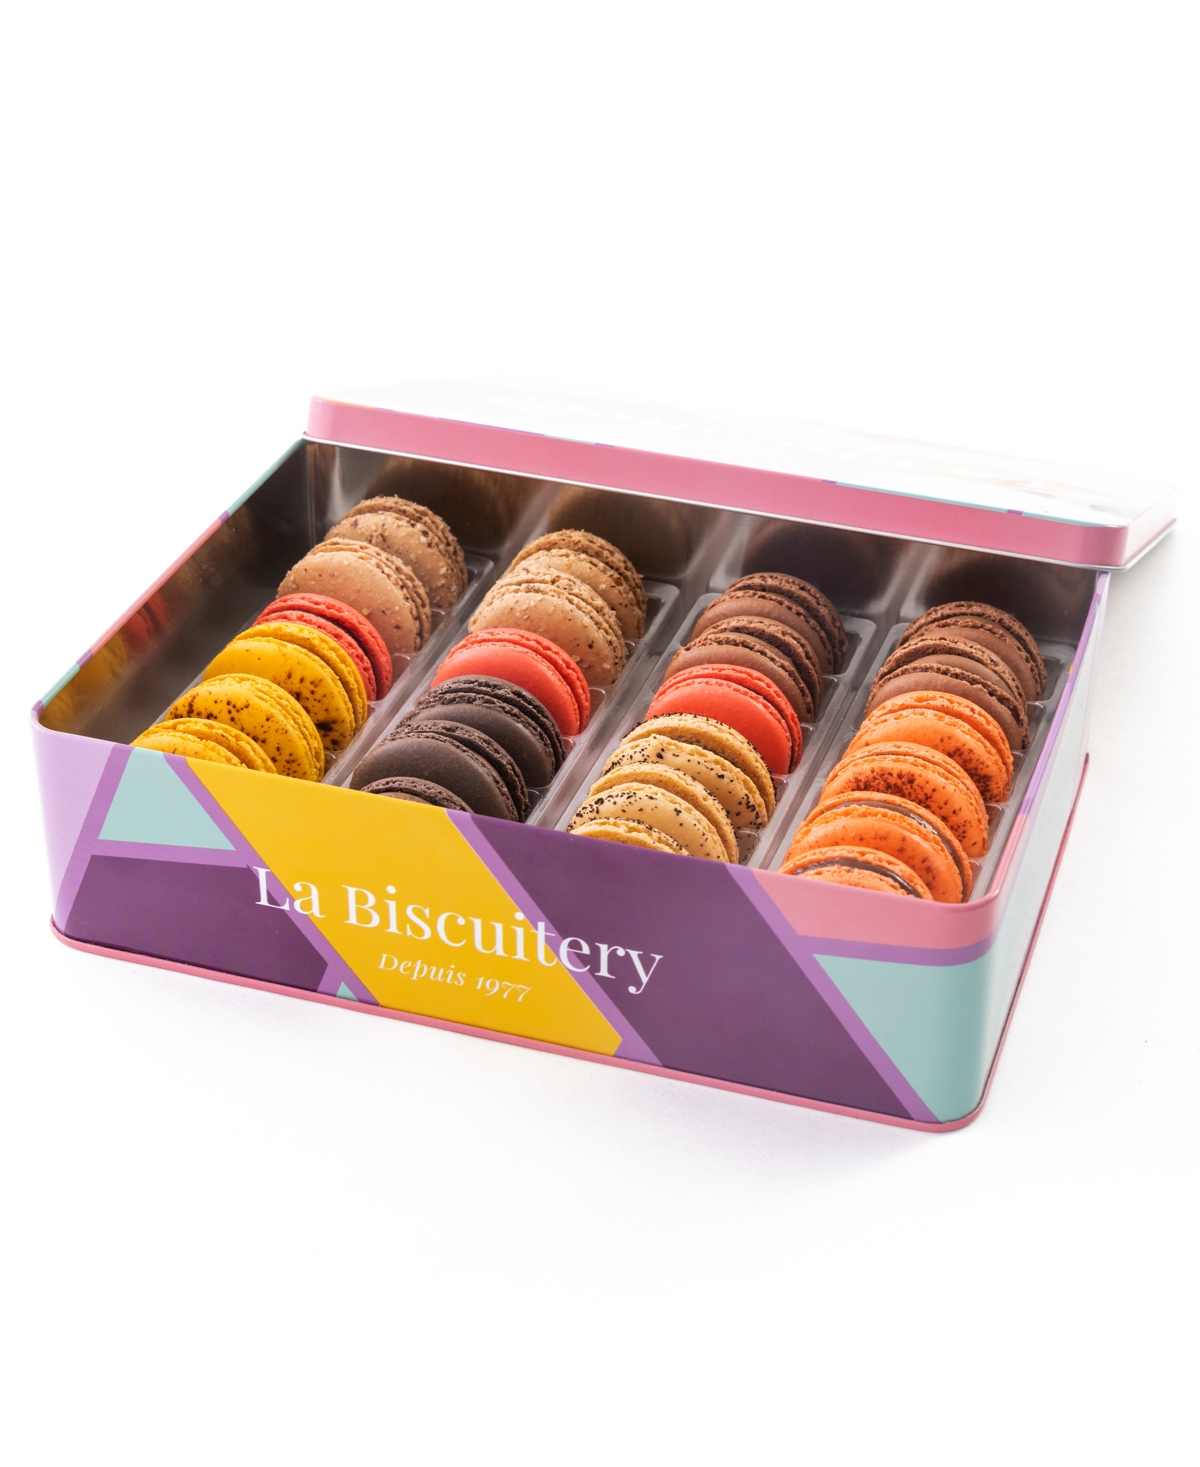 La Biscuitery The Chocoholic Box Of 24 Macarons In No Color